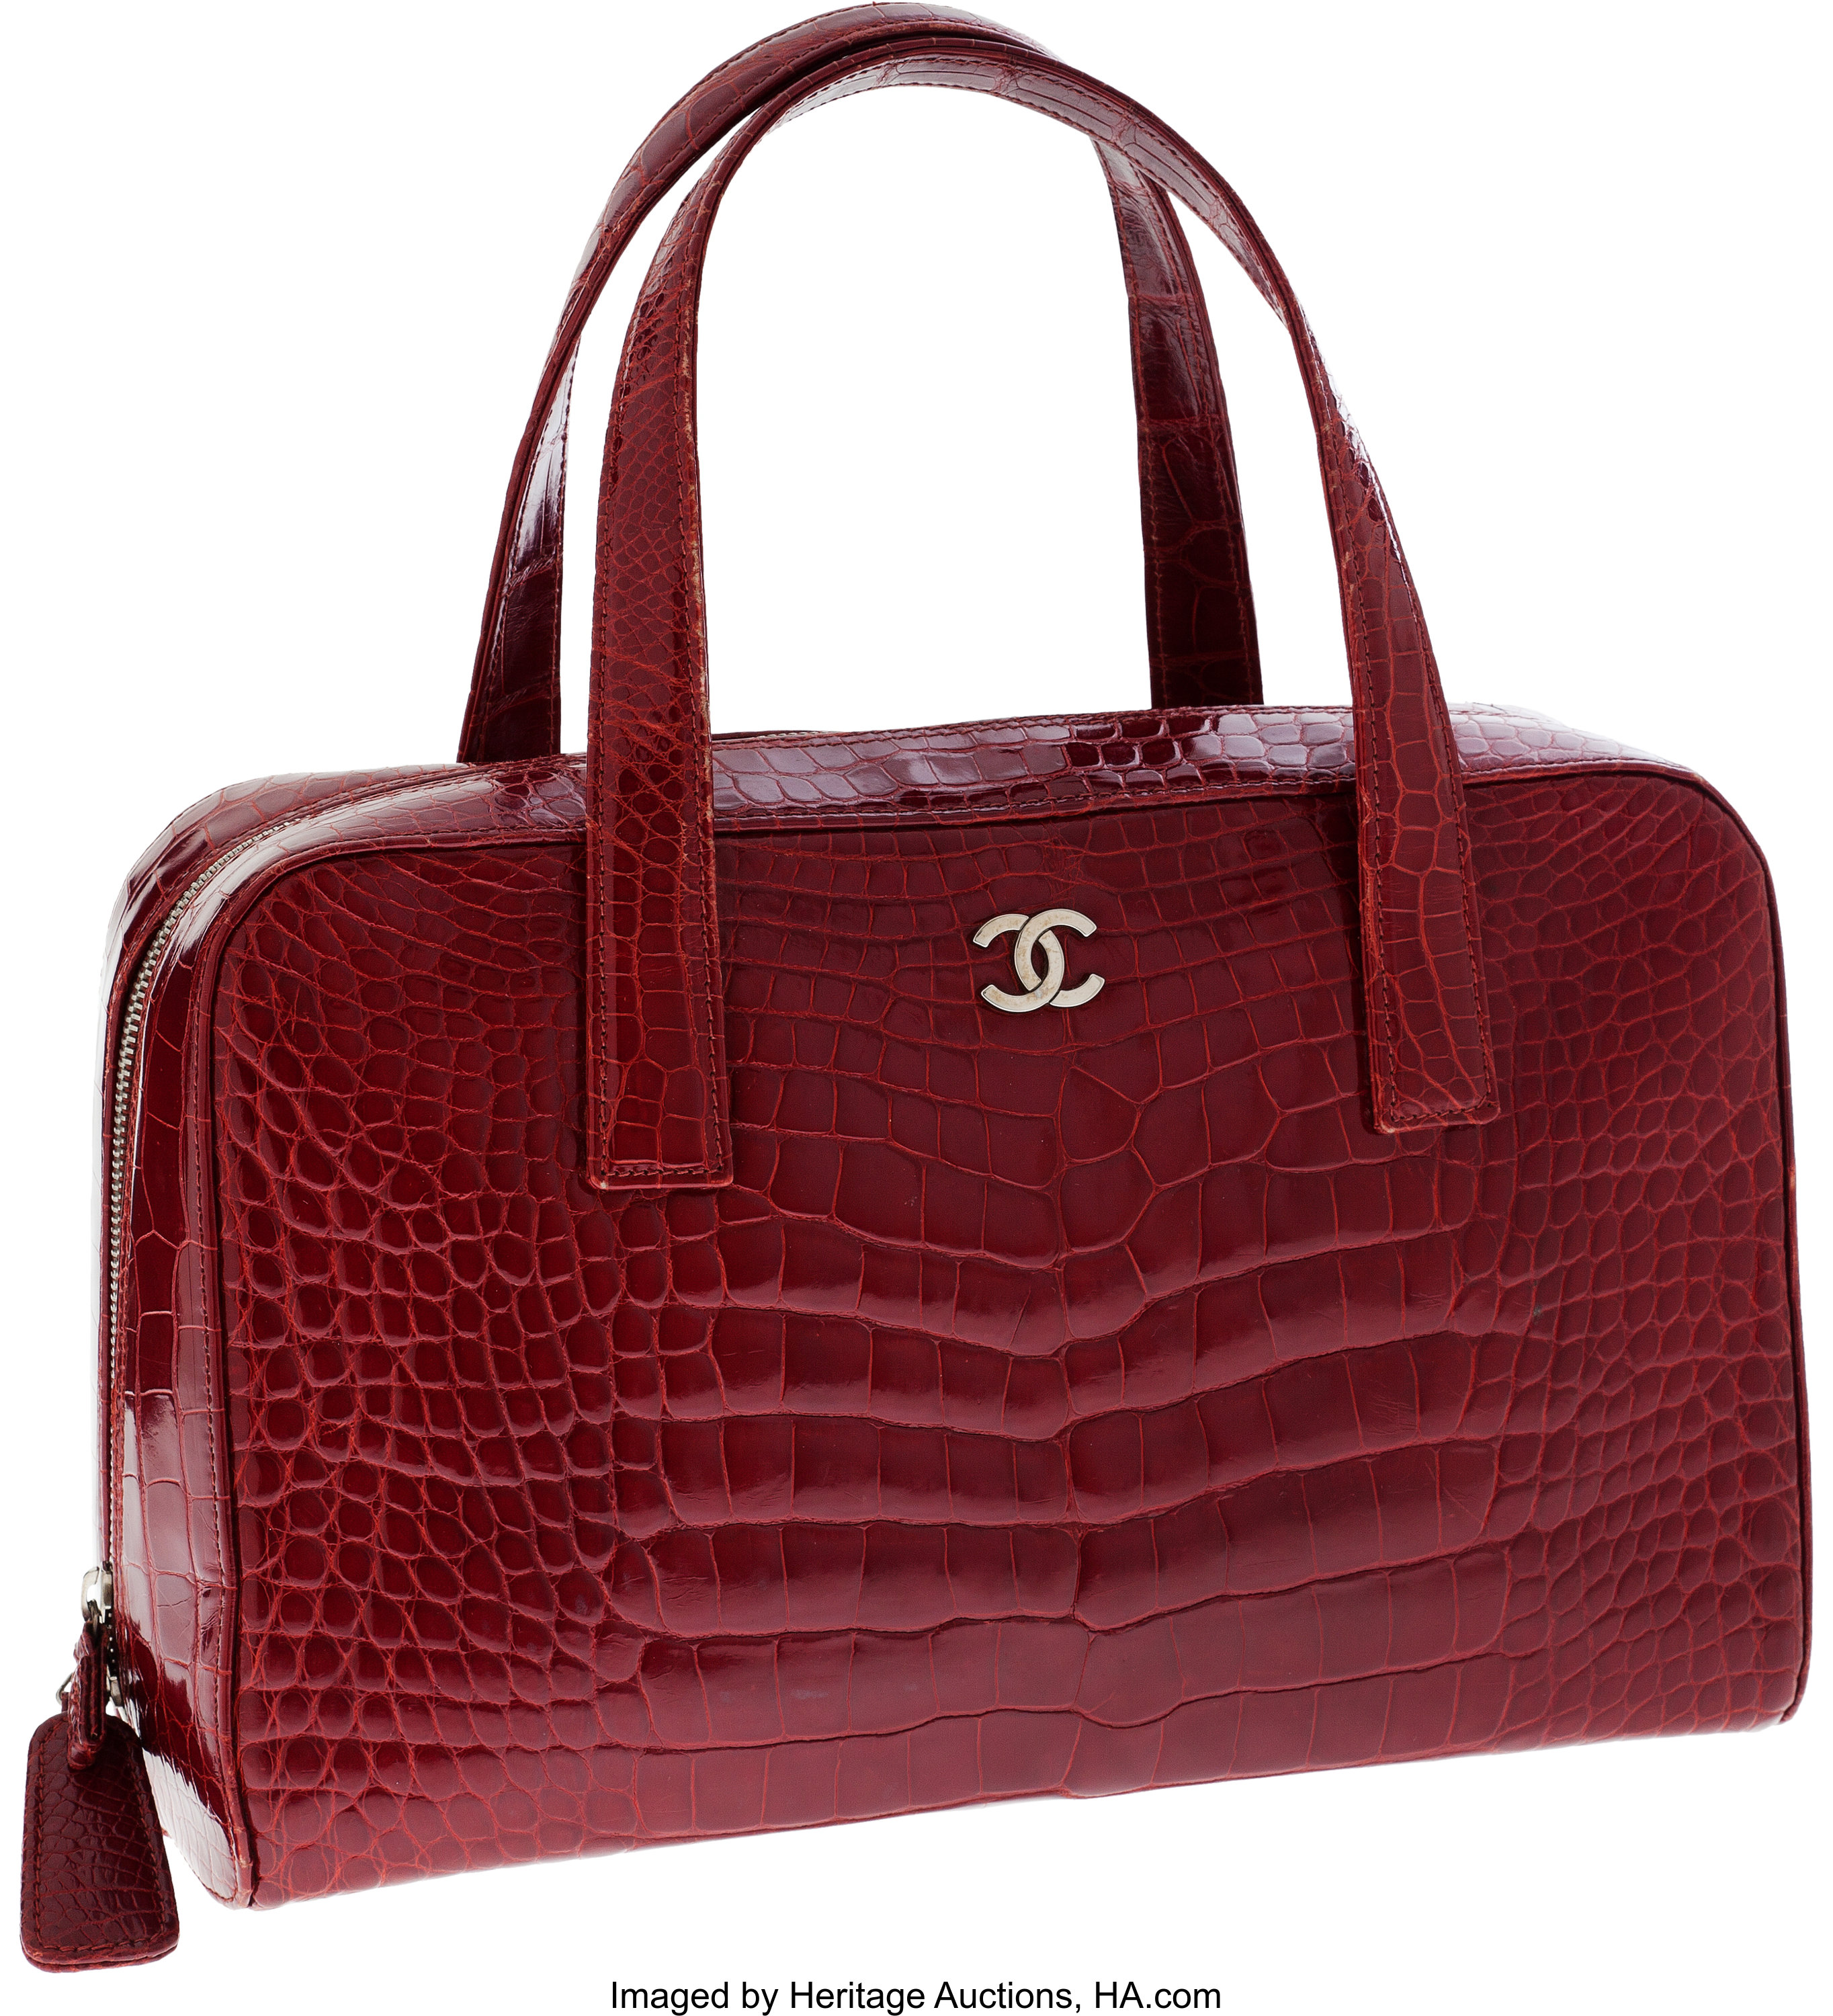 Chanel Shiny Red Crocodile Large Bowling Bag with Silver Hardware